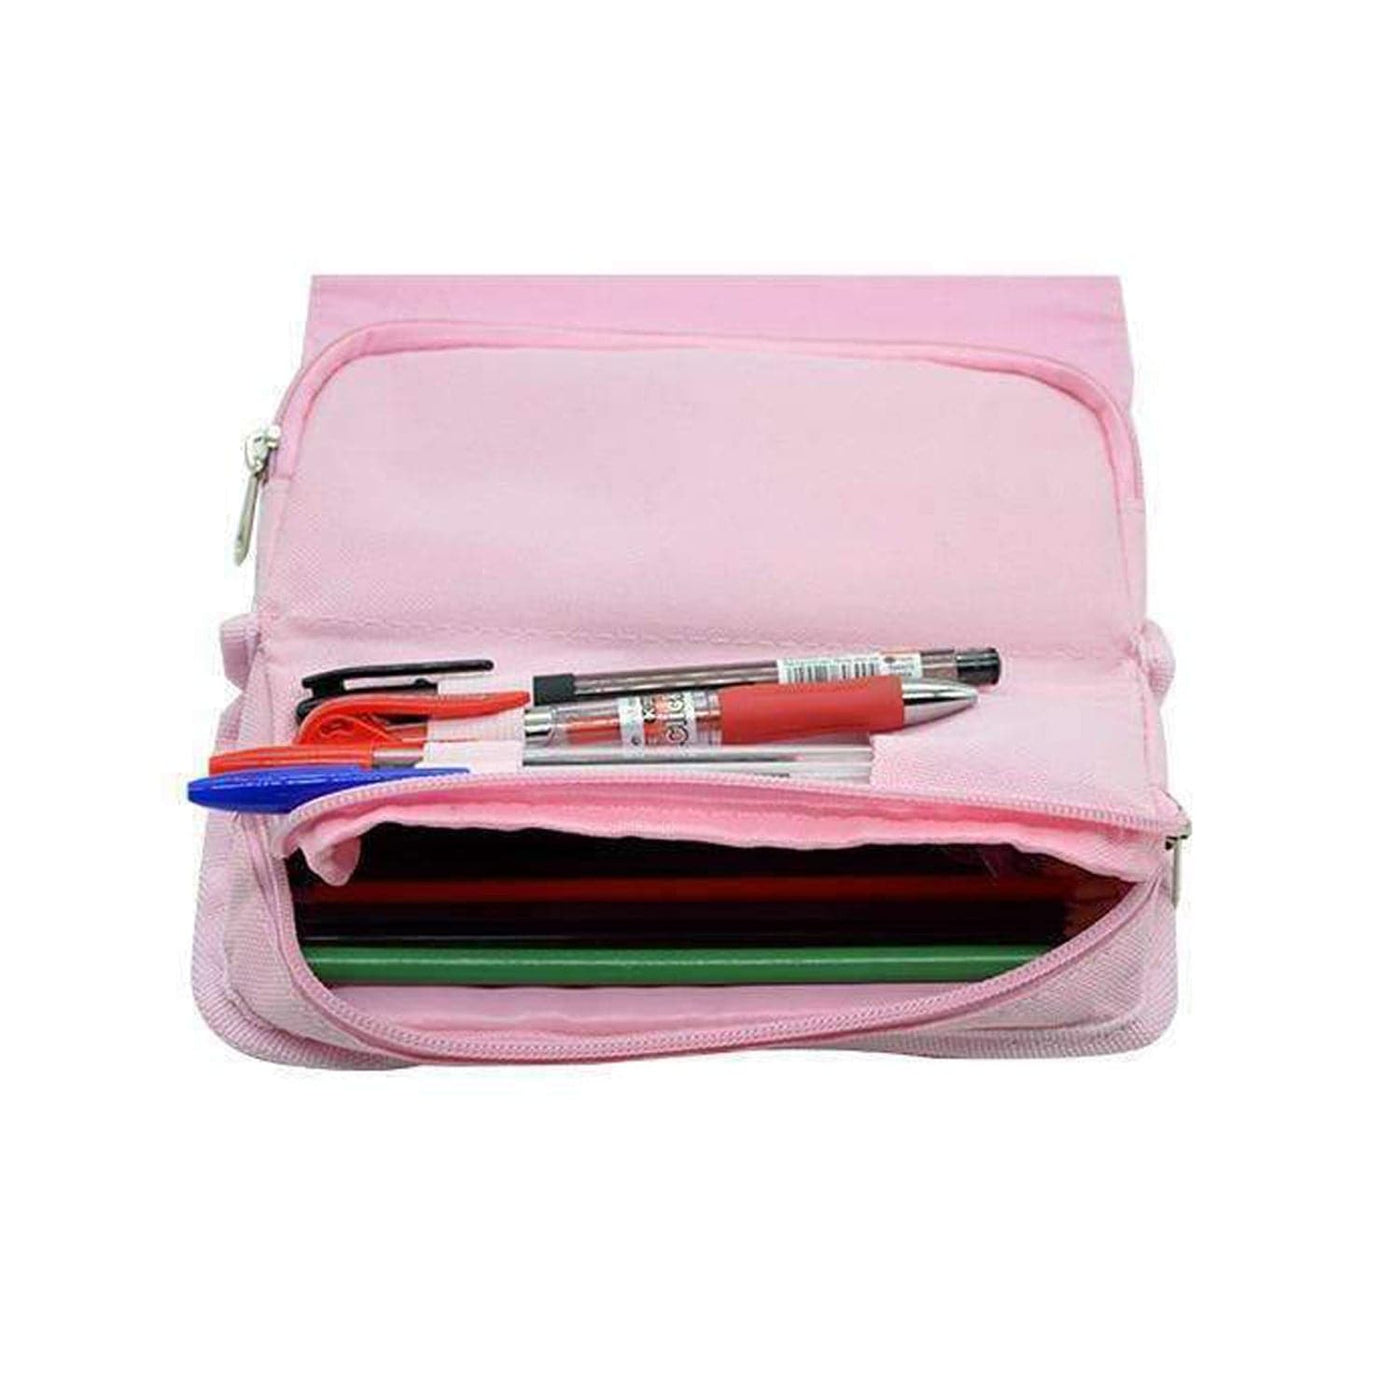 Red Locket And Key - Valentine's Day Pencil Case